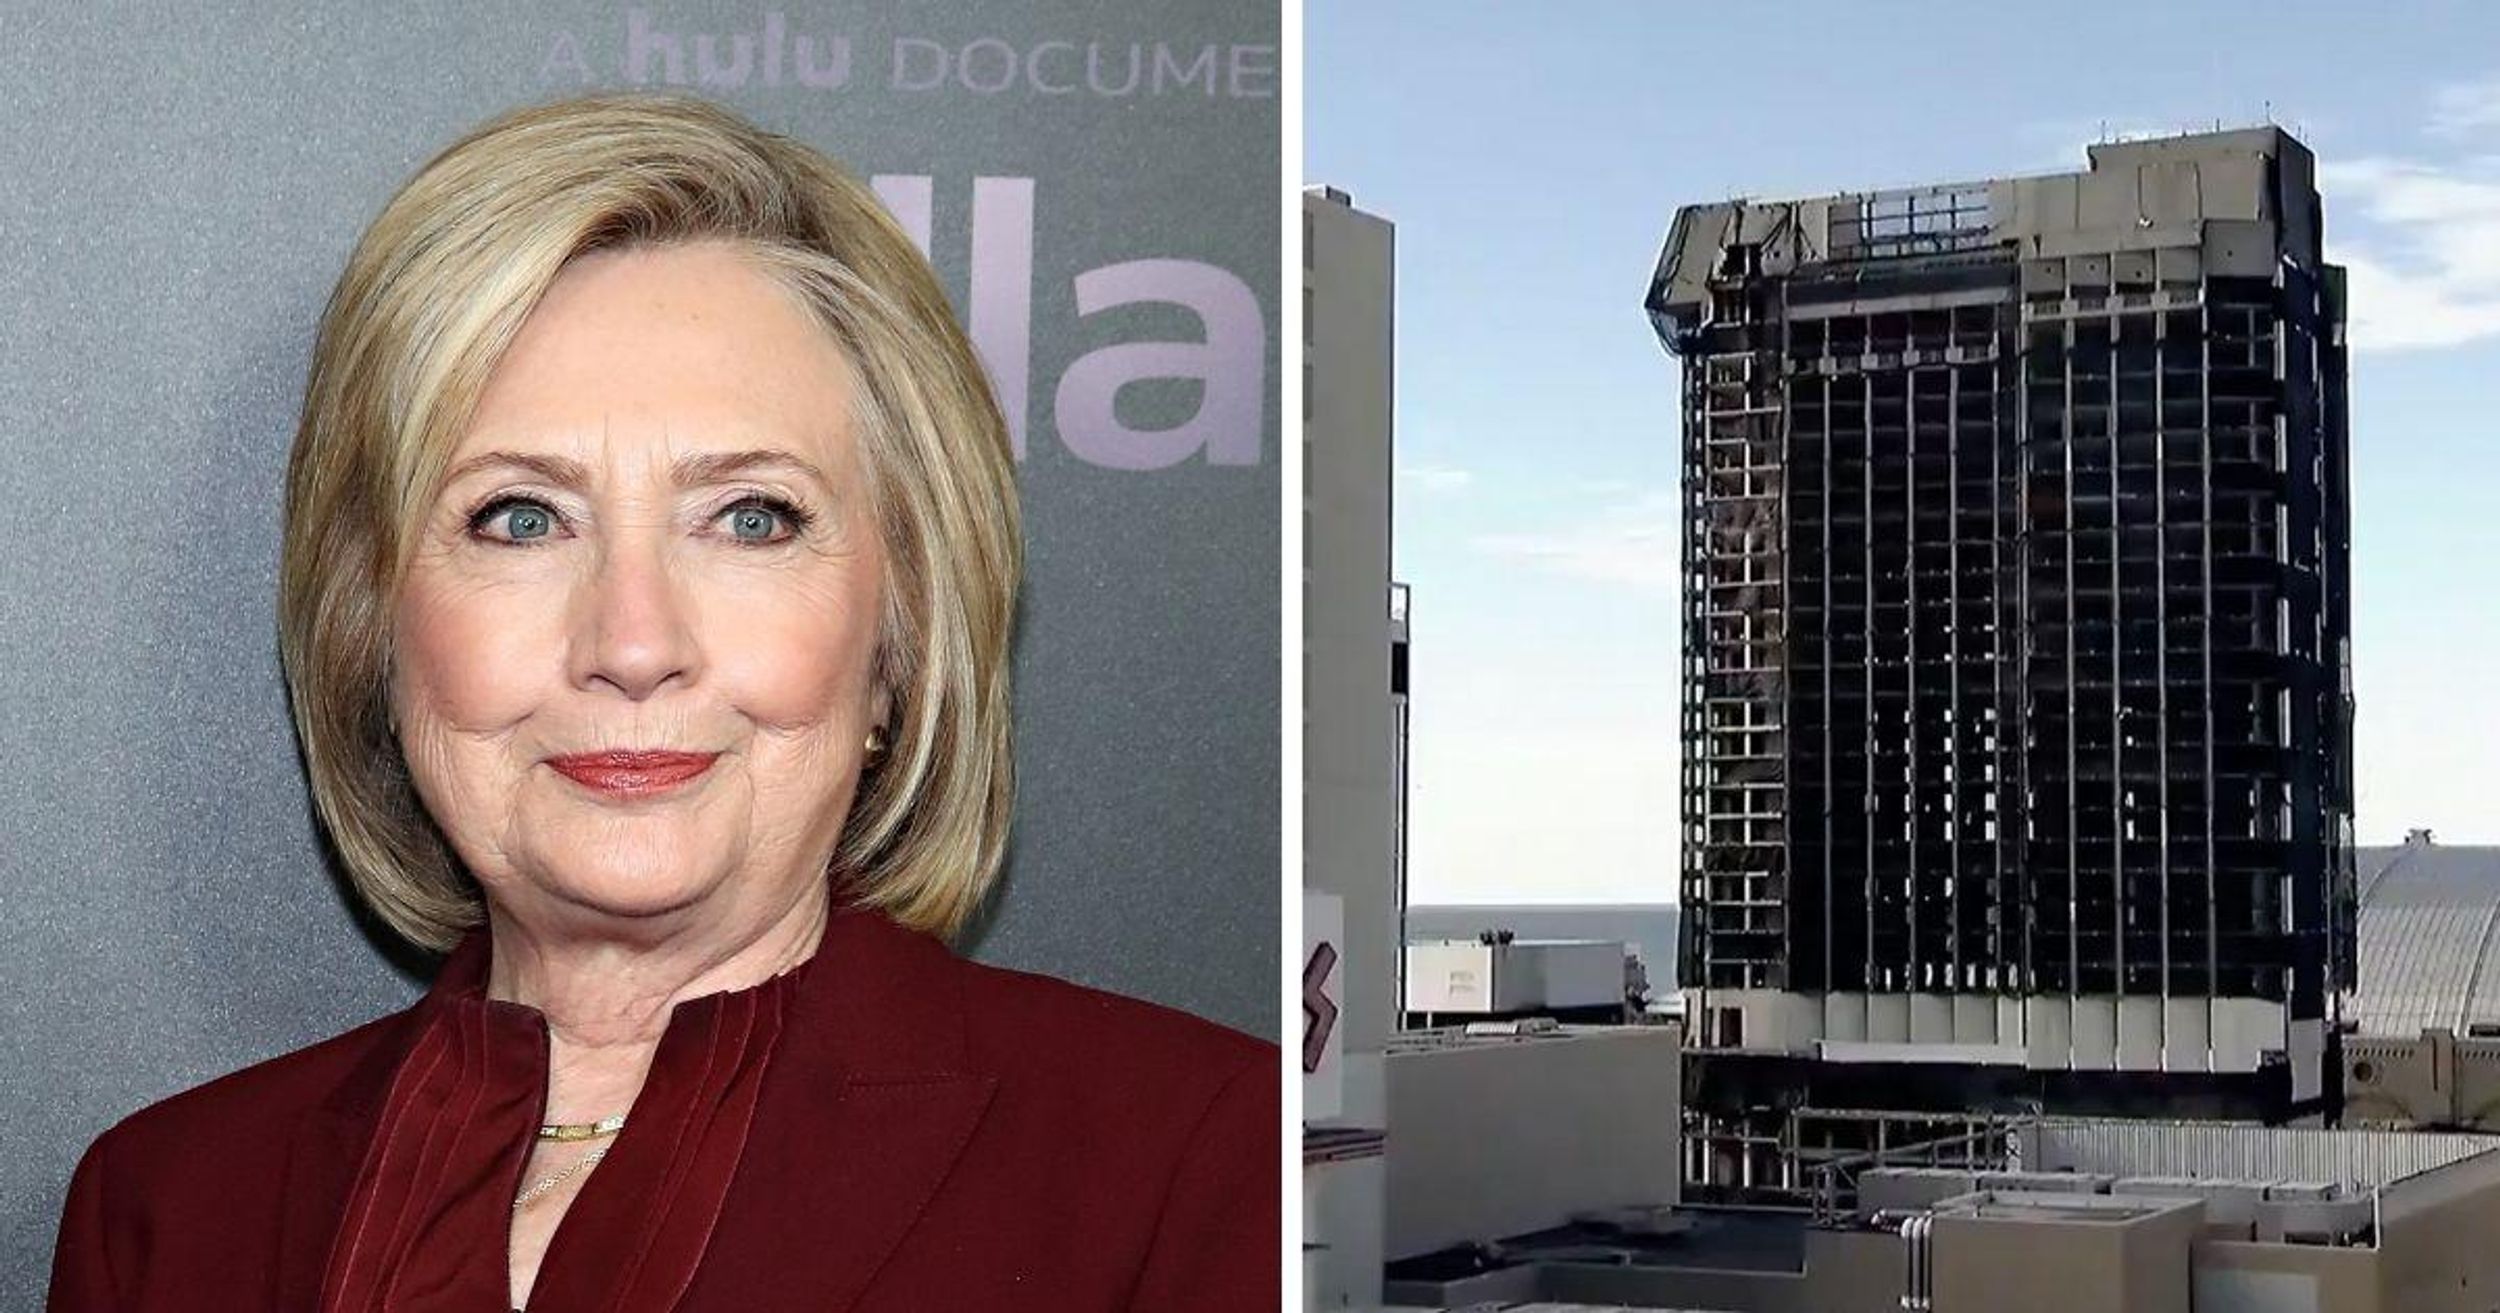 Hillary Clinton Had The Perfect Reaction To Video Of Trump's Atlantic City Casino Getting Demolished